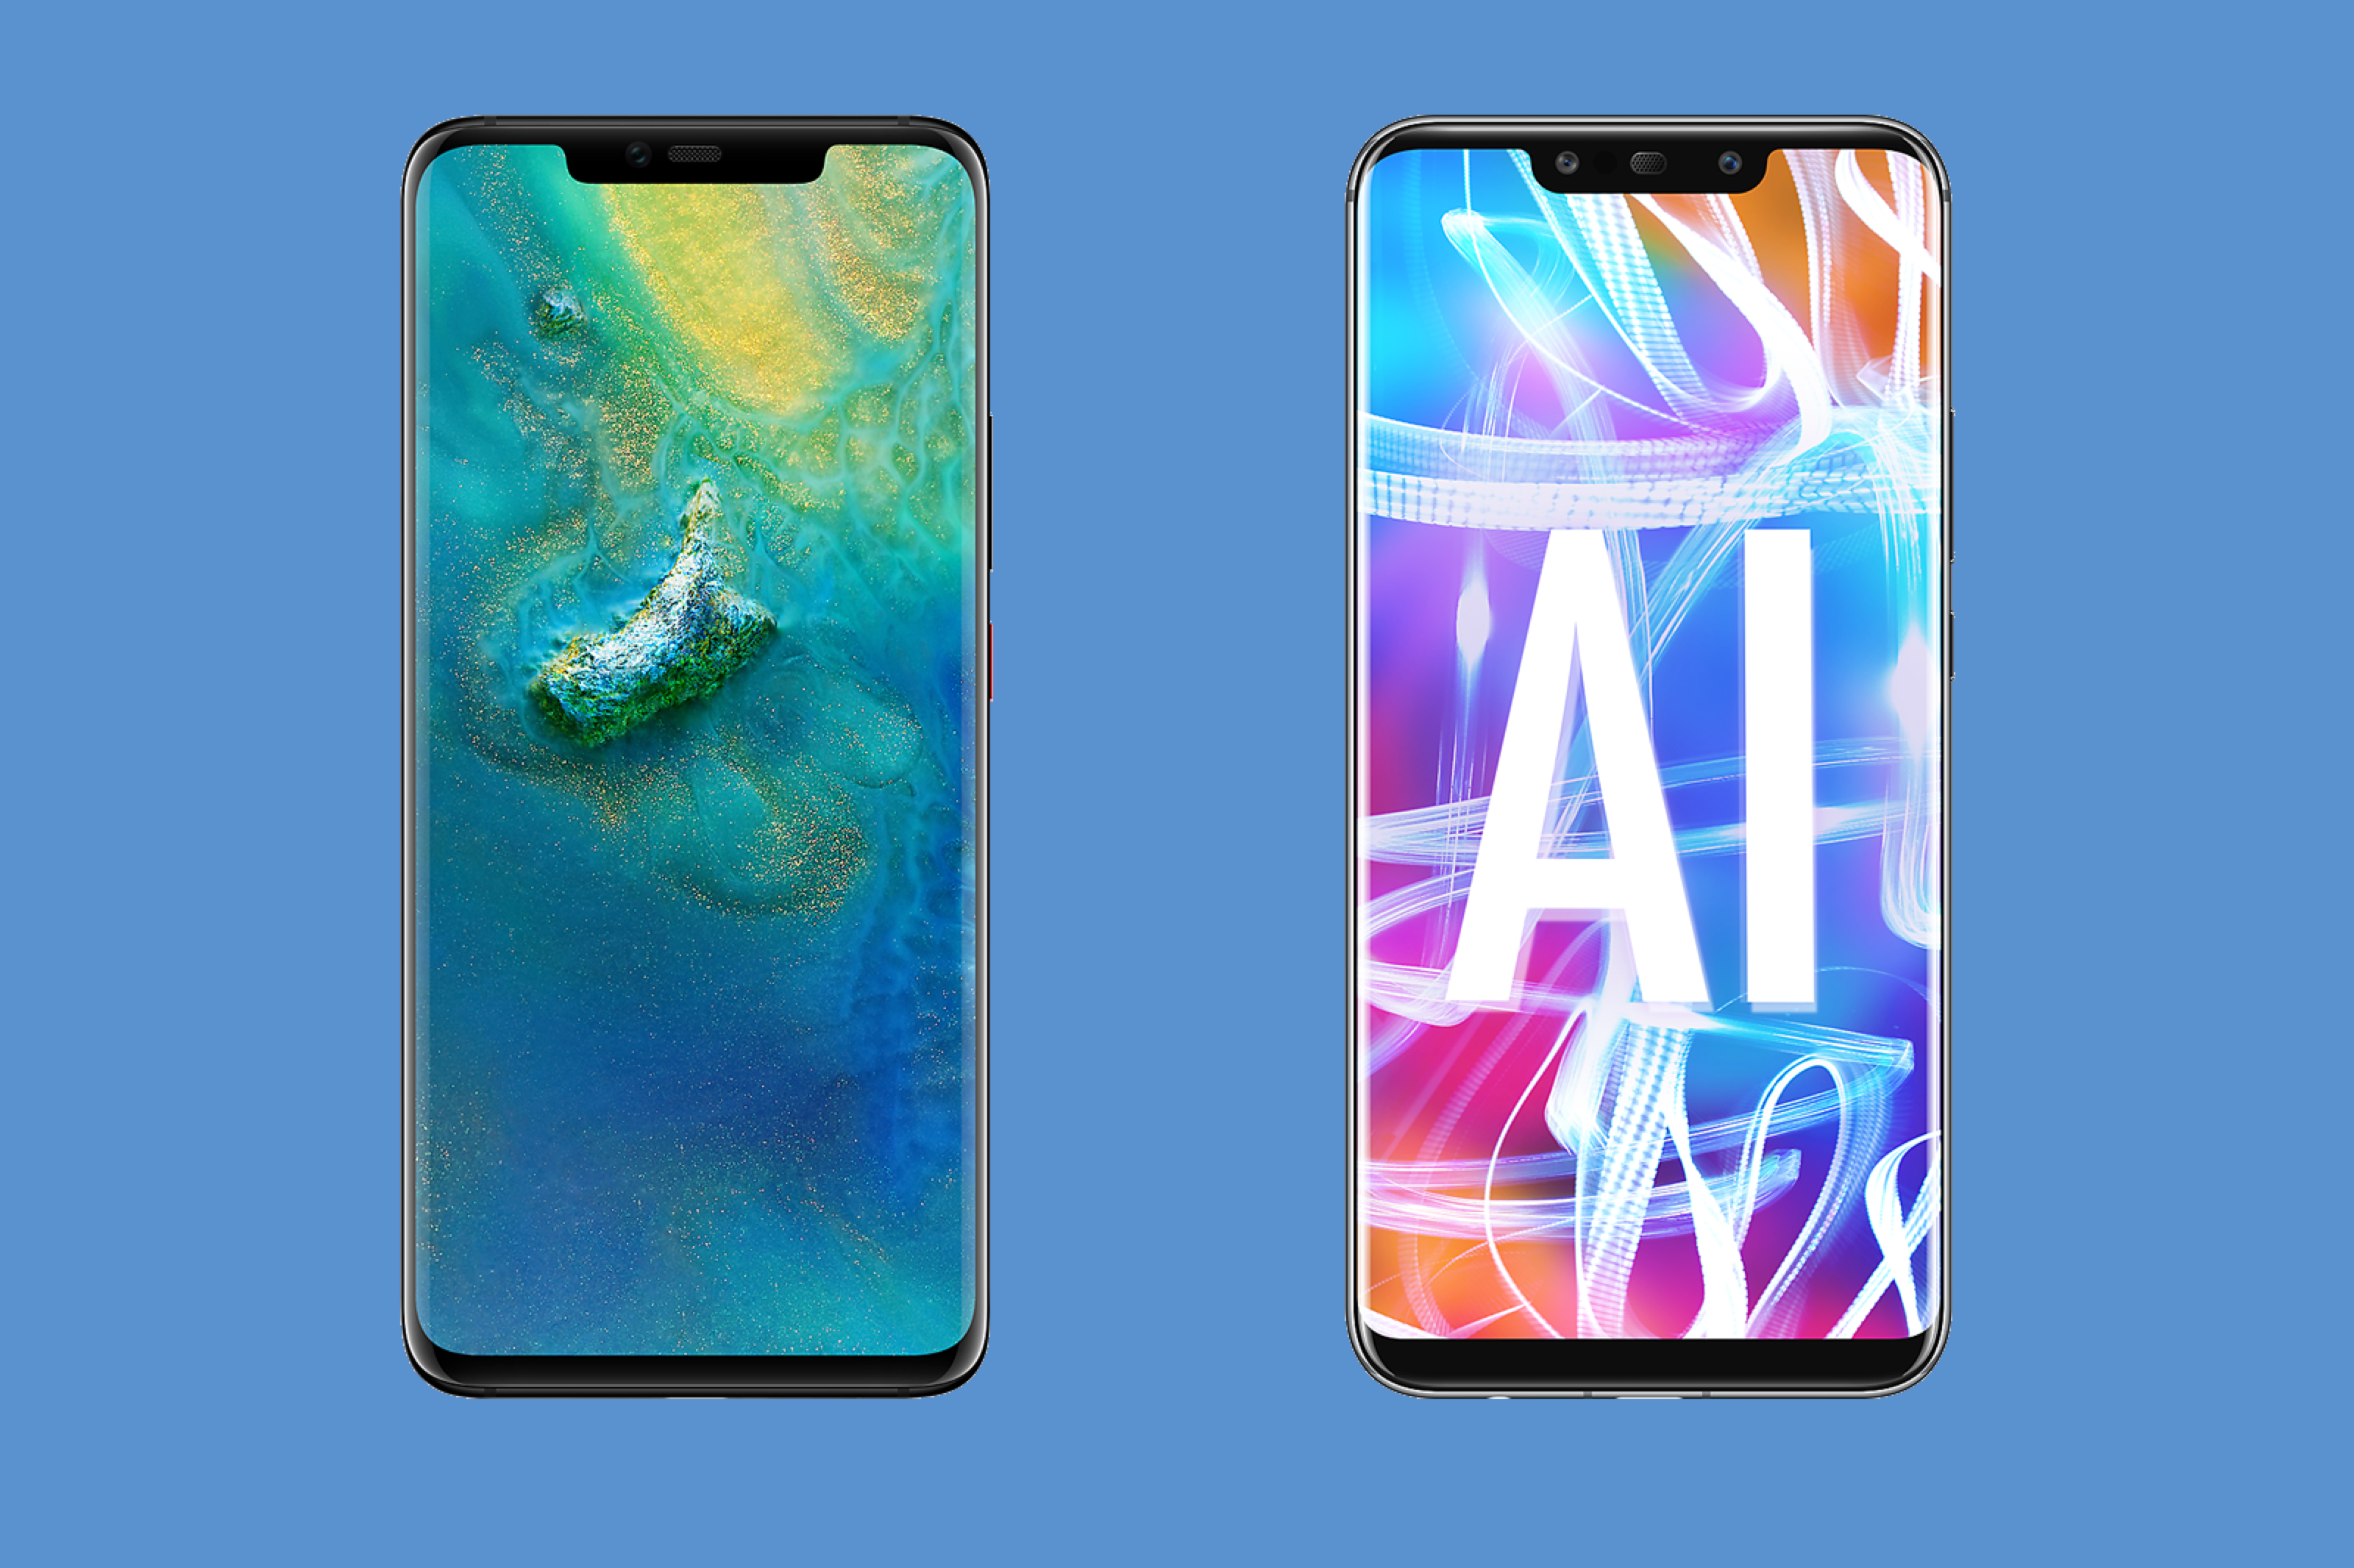 Best accessories for the Huawei Mate 20 Pro and Mate 20 Lite from Carphone Warehouse image 1